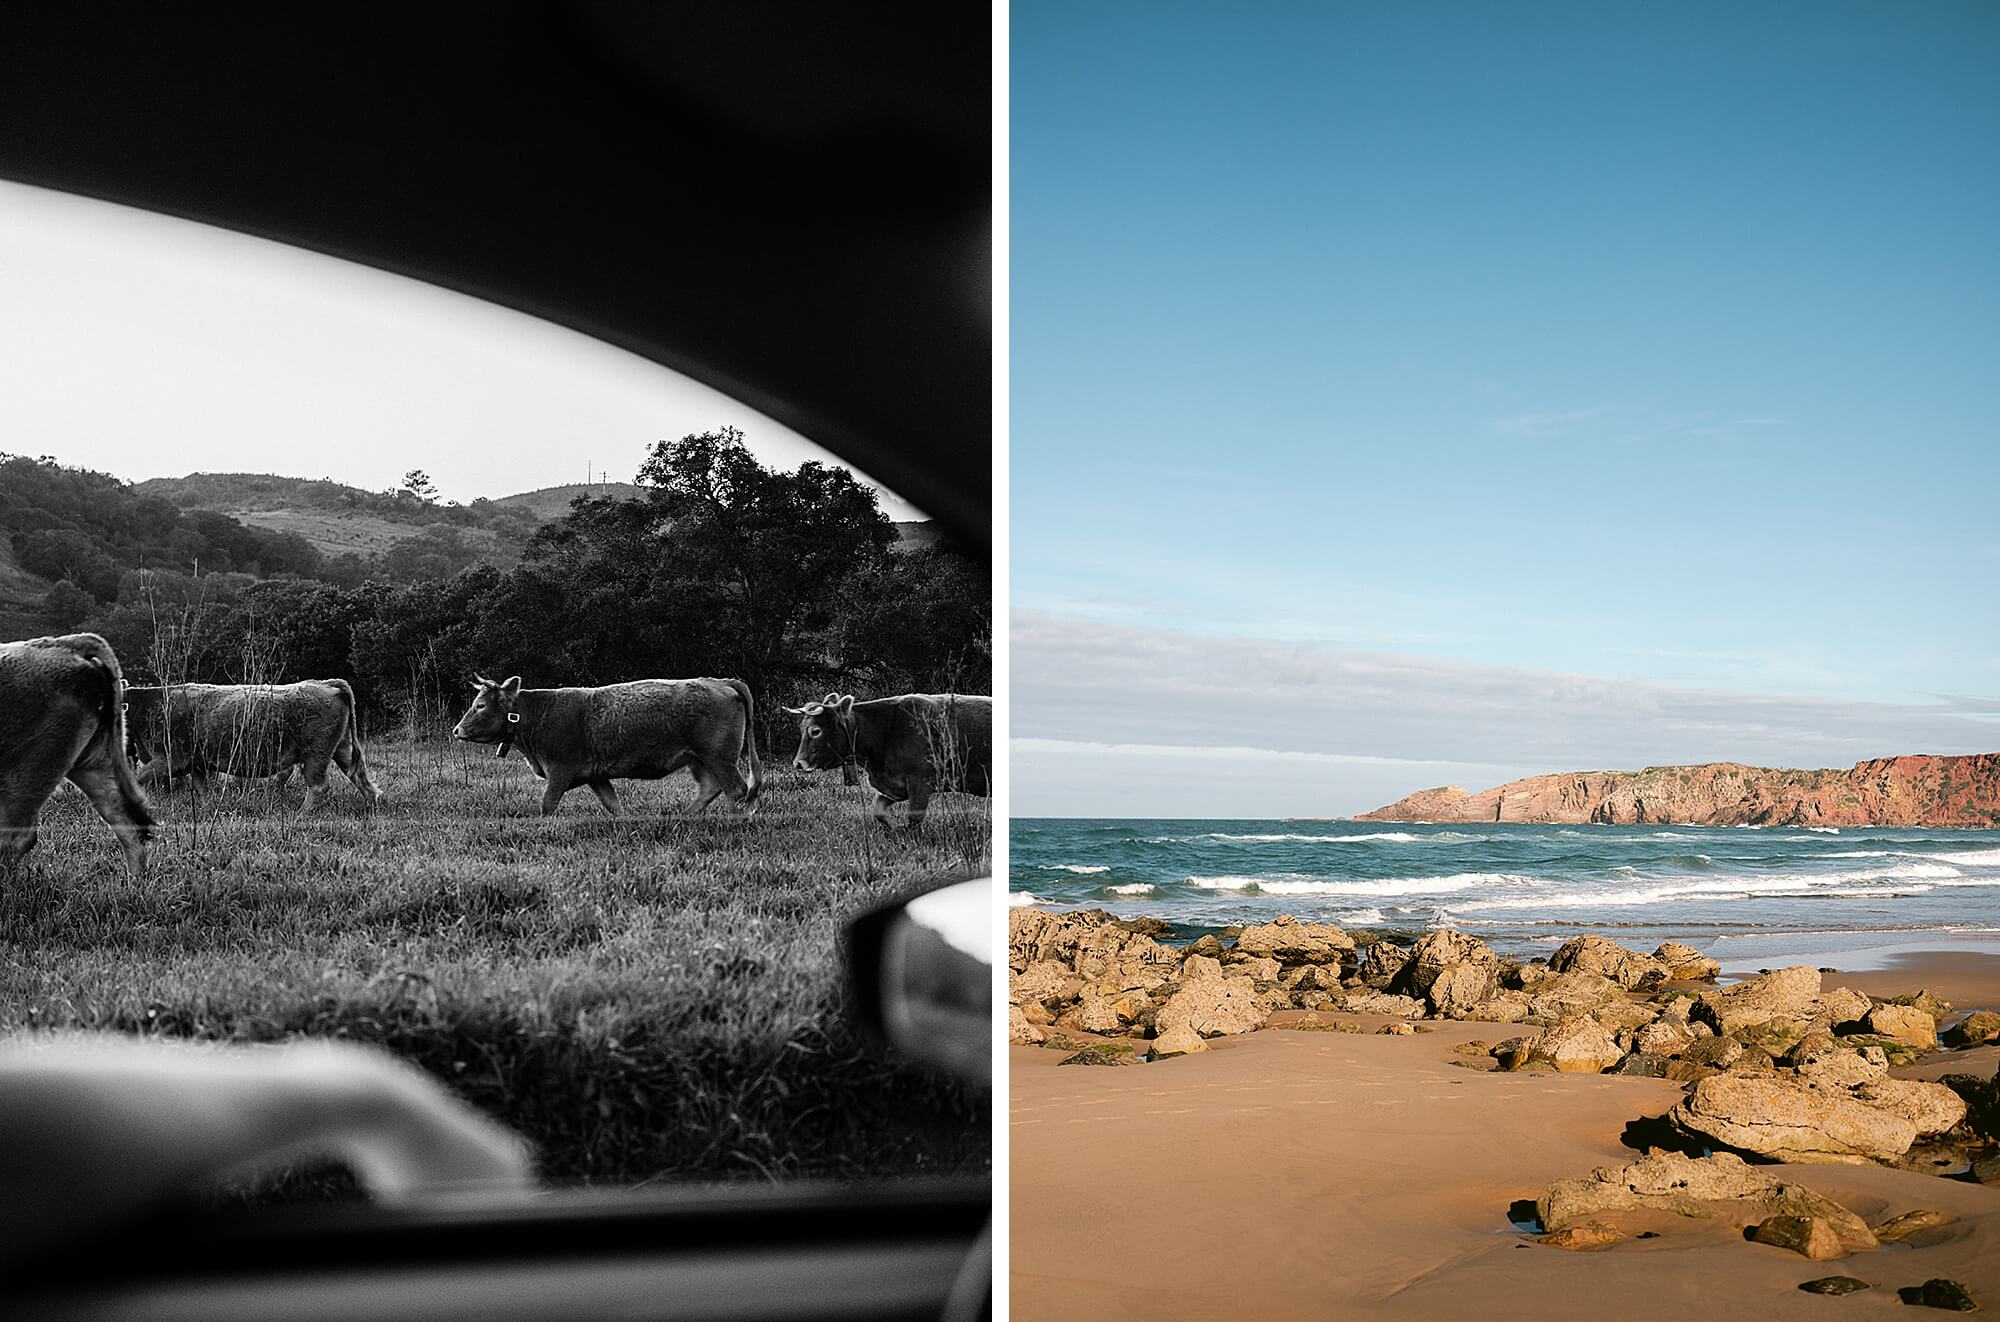 Roadtrip in the Algarve with our Volkswagen UP | Colorful, adventurous travel photography by Raisa Zwart